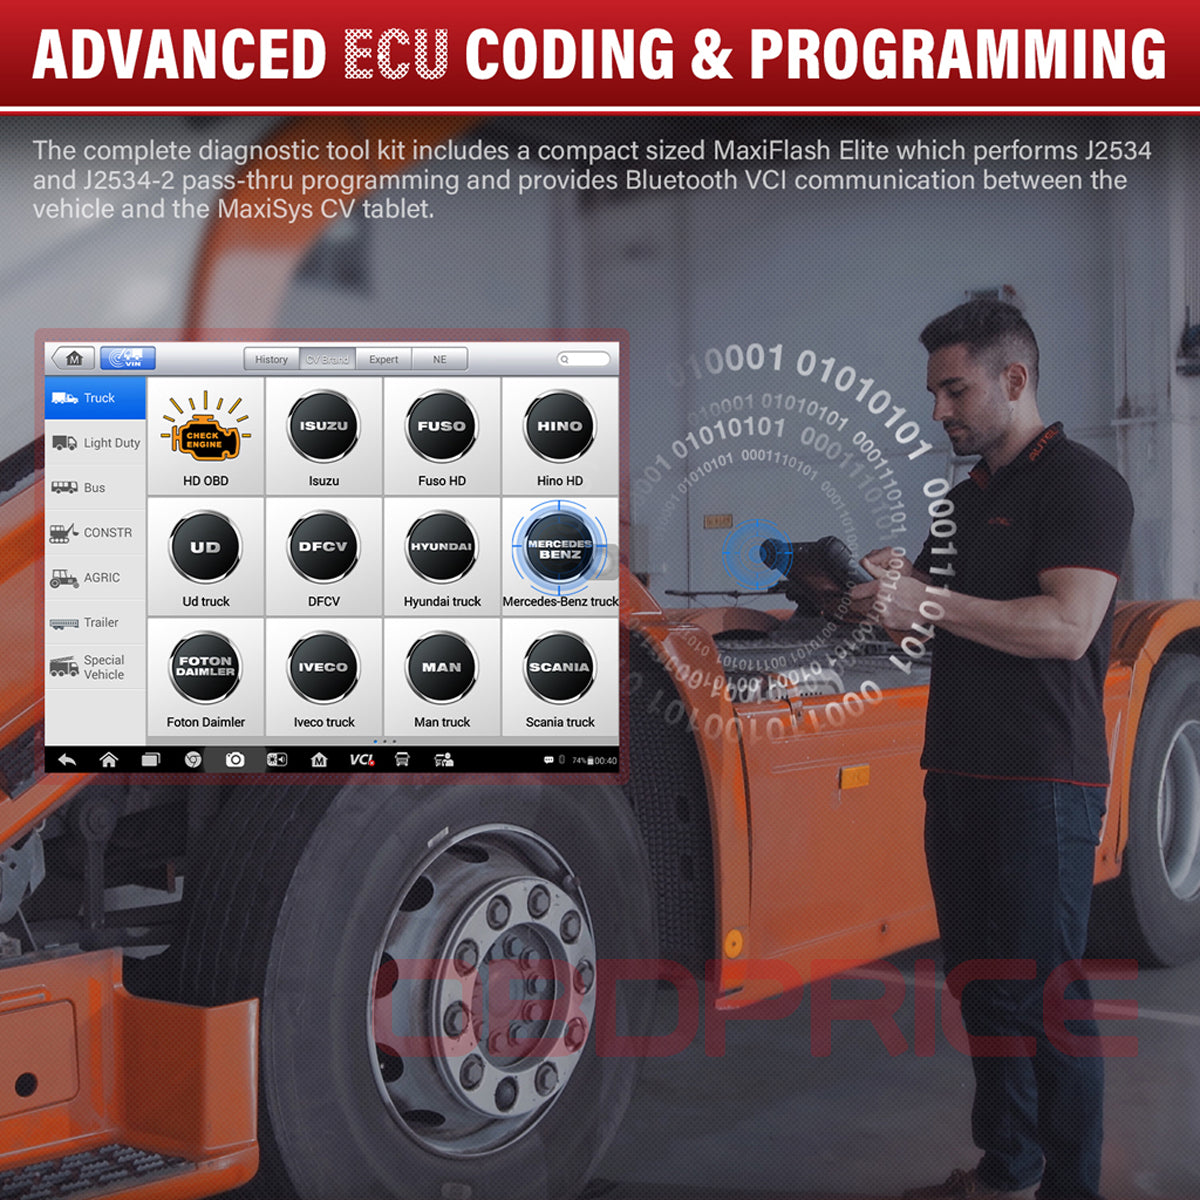 Autel MS908CV Scanner Maxisys CV Heavy Duty Truck Diagnostic Tool with ecu programming functions